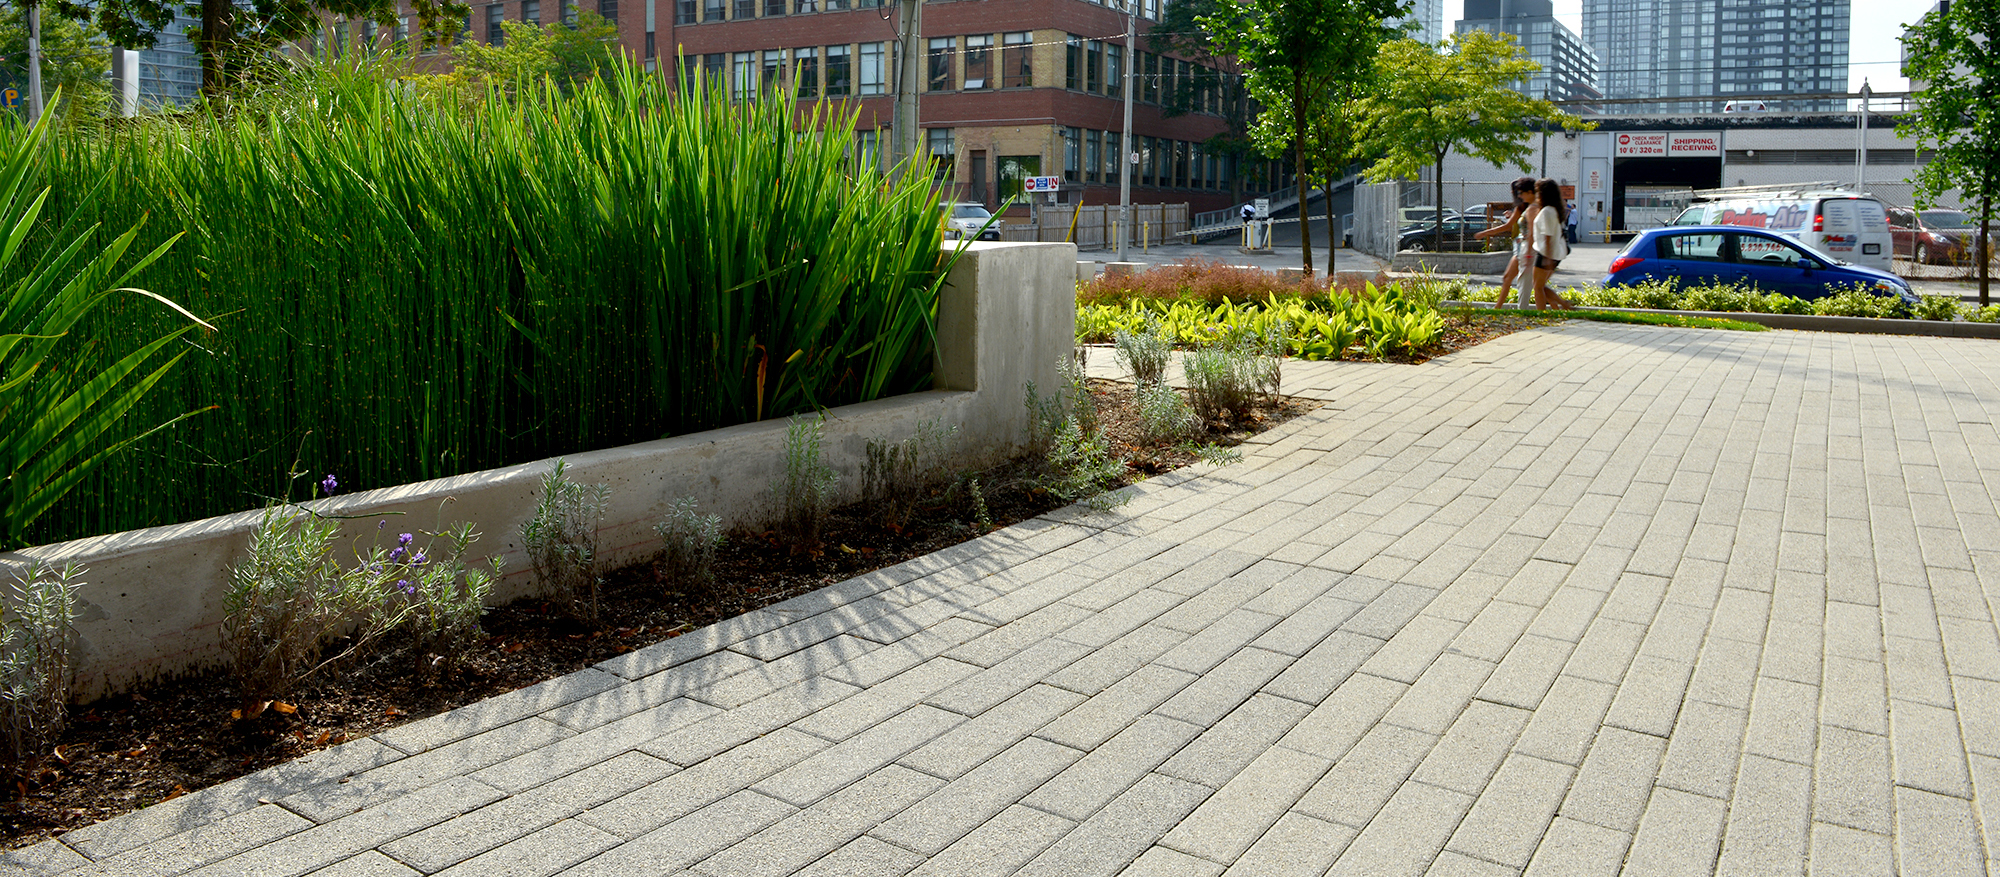 Unilock Promenade Plank pavers in a speckled Umbriano finish create a plaza and sidewalk with gardens around it.